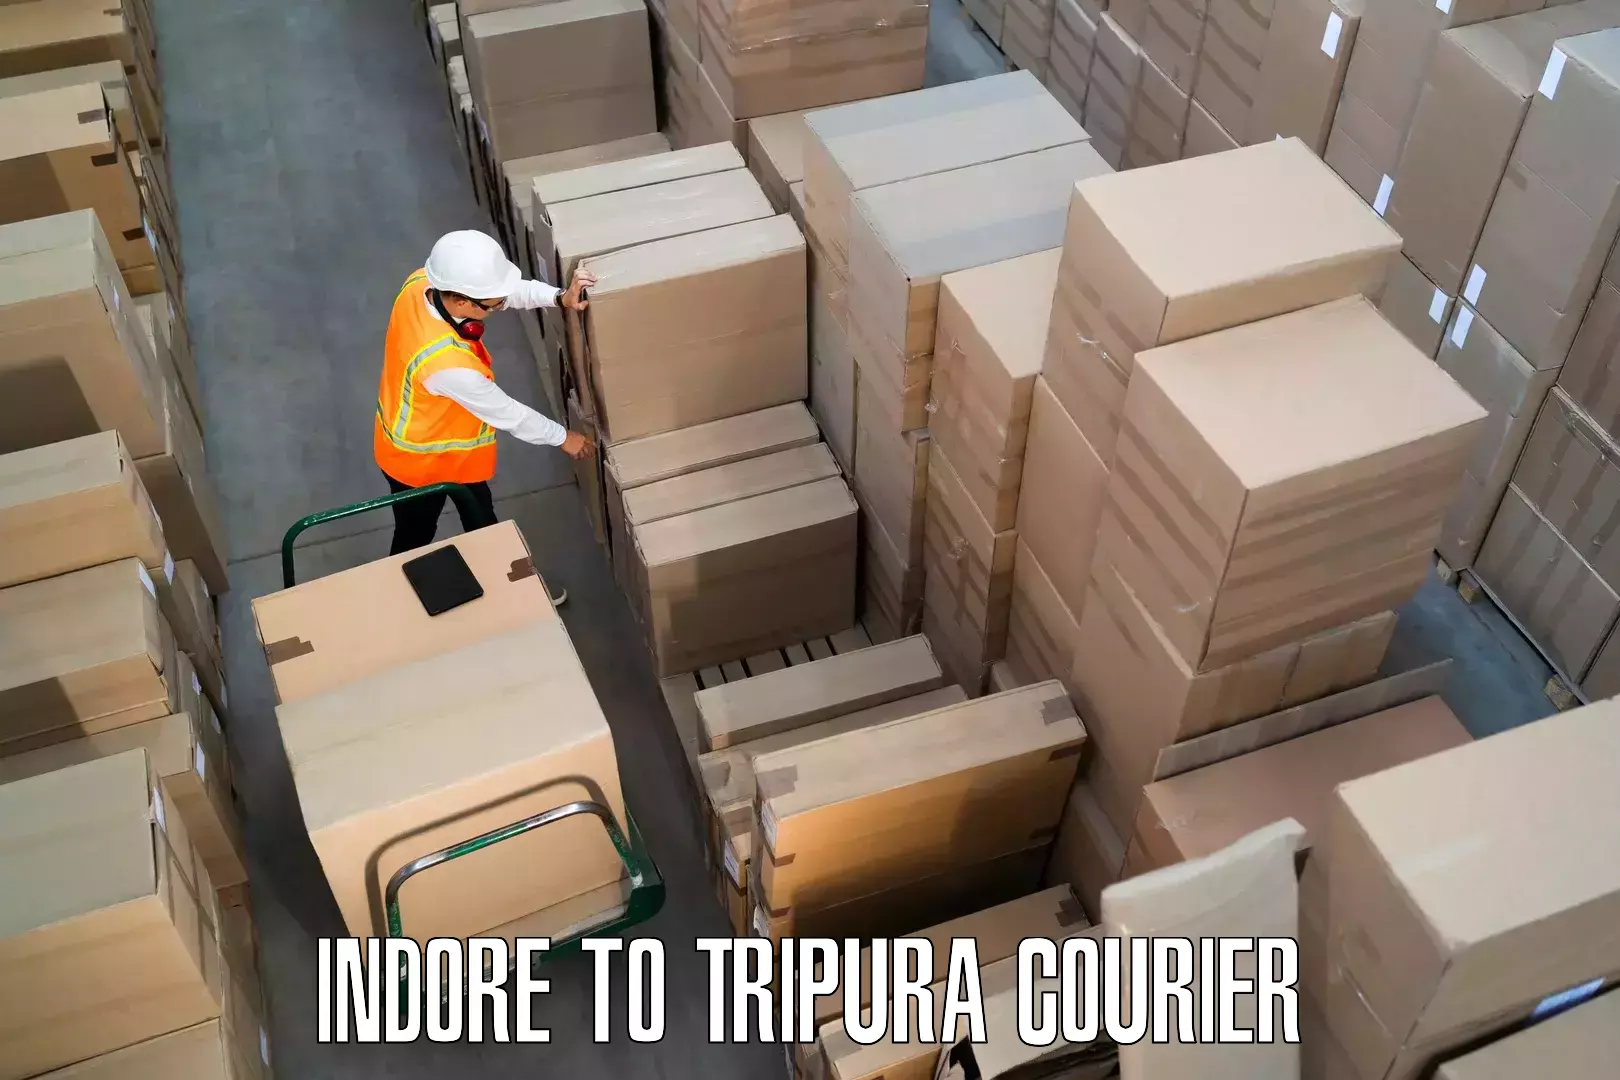 Furniture transport specialists Indore to Tripura